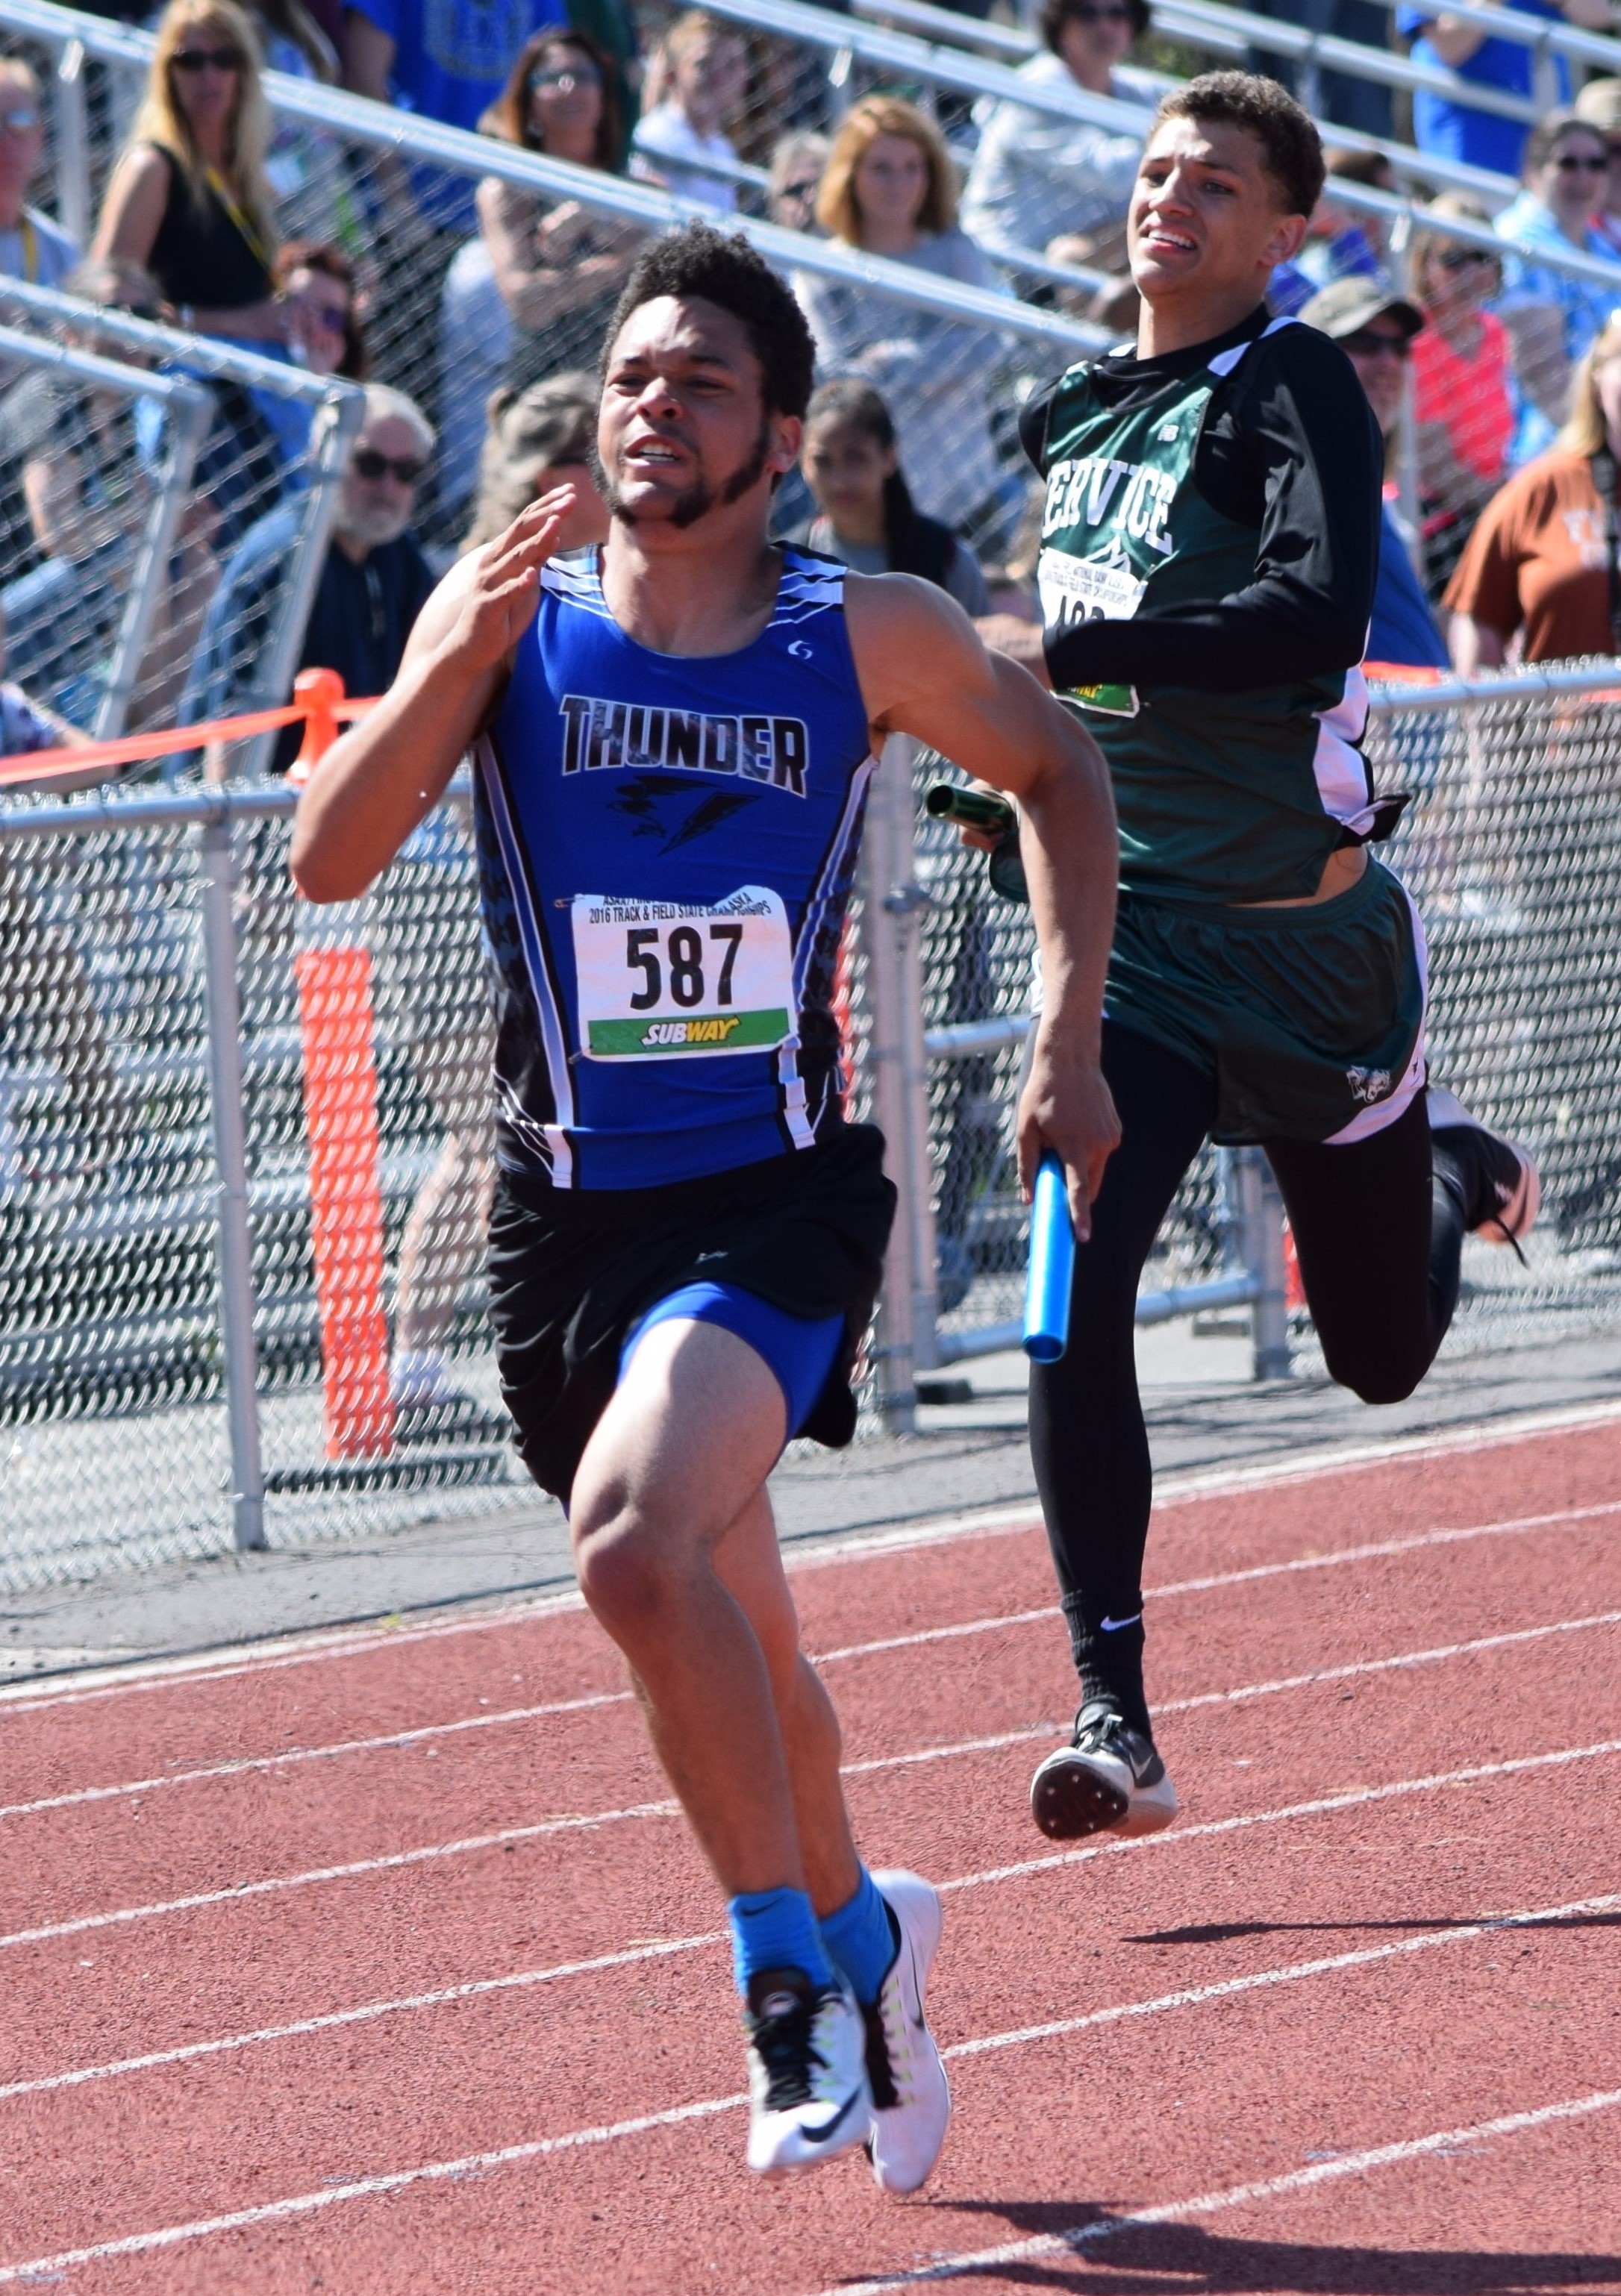 Thunder Mountain's Aiden Hildebrand competes in the 4x100-meter relay Saturday in Anchorage during the state track and field championships. The TMHS team finished first with a time of 43.73 seconds.